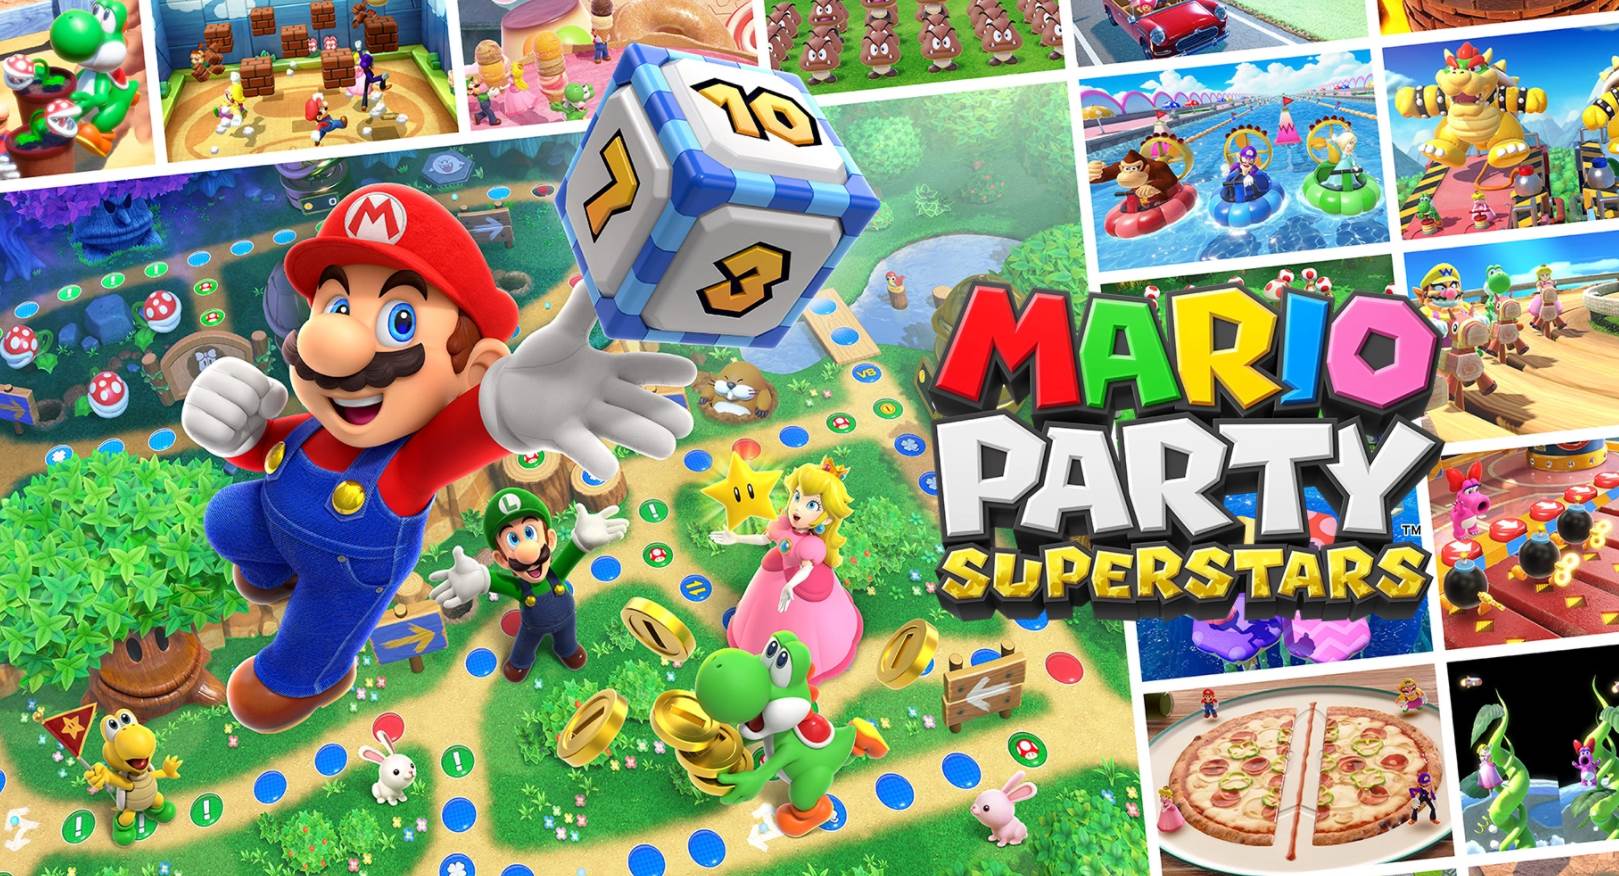 Does Mario Party Superstars Have Online Voice Chat?